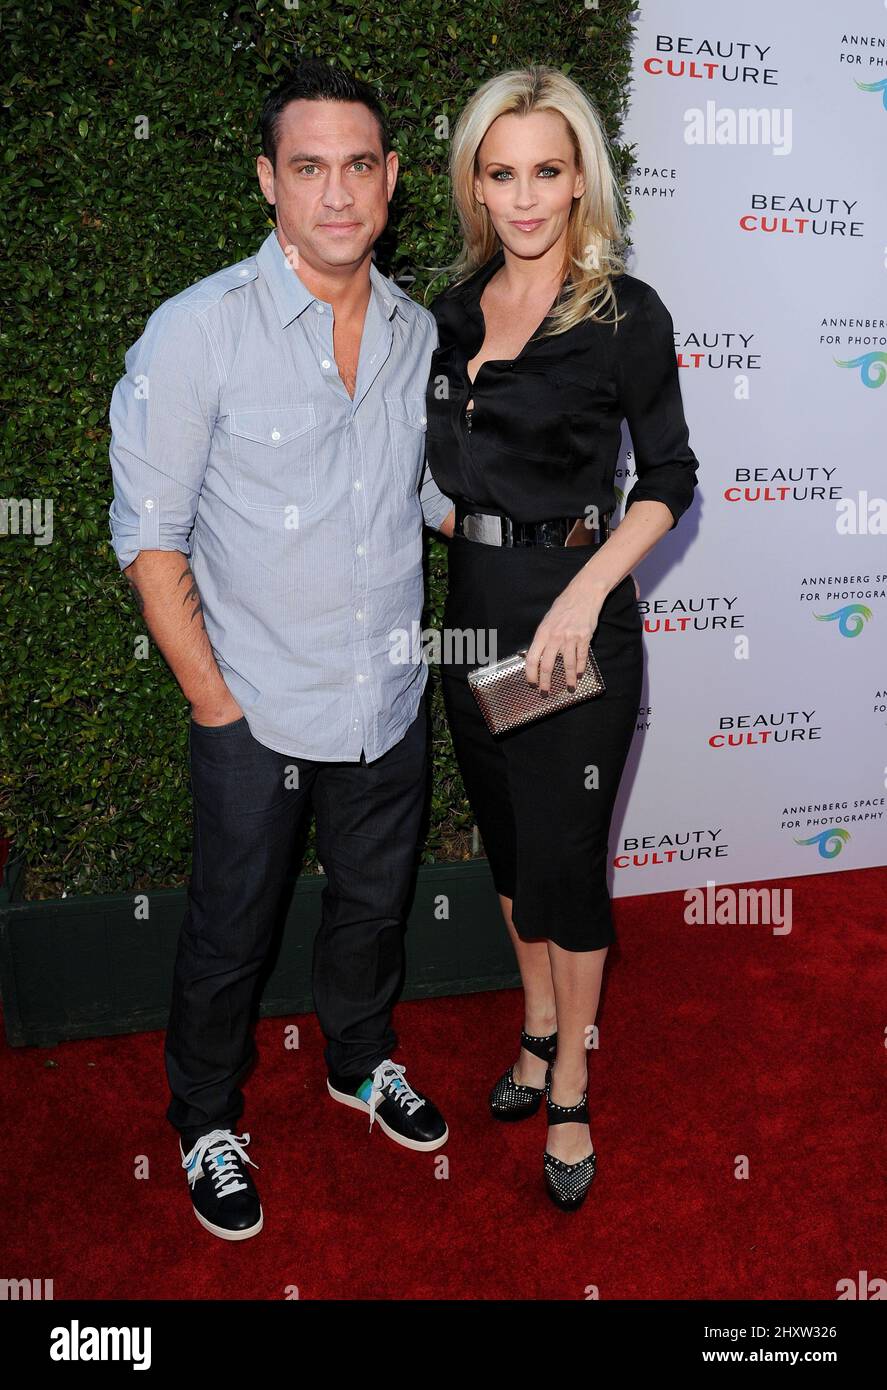 Jenny McCarthy and boyfriend Paul Krepelka attends 'Beauty Culture' Opening Night held at The Annenberg Space For Photography, California Stock Photo